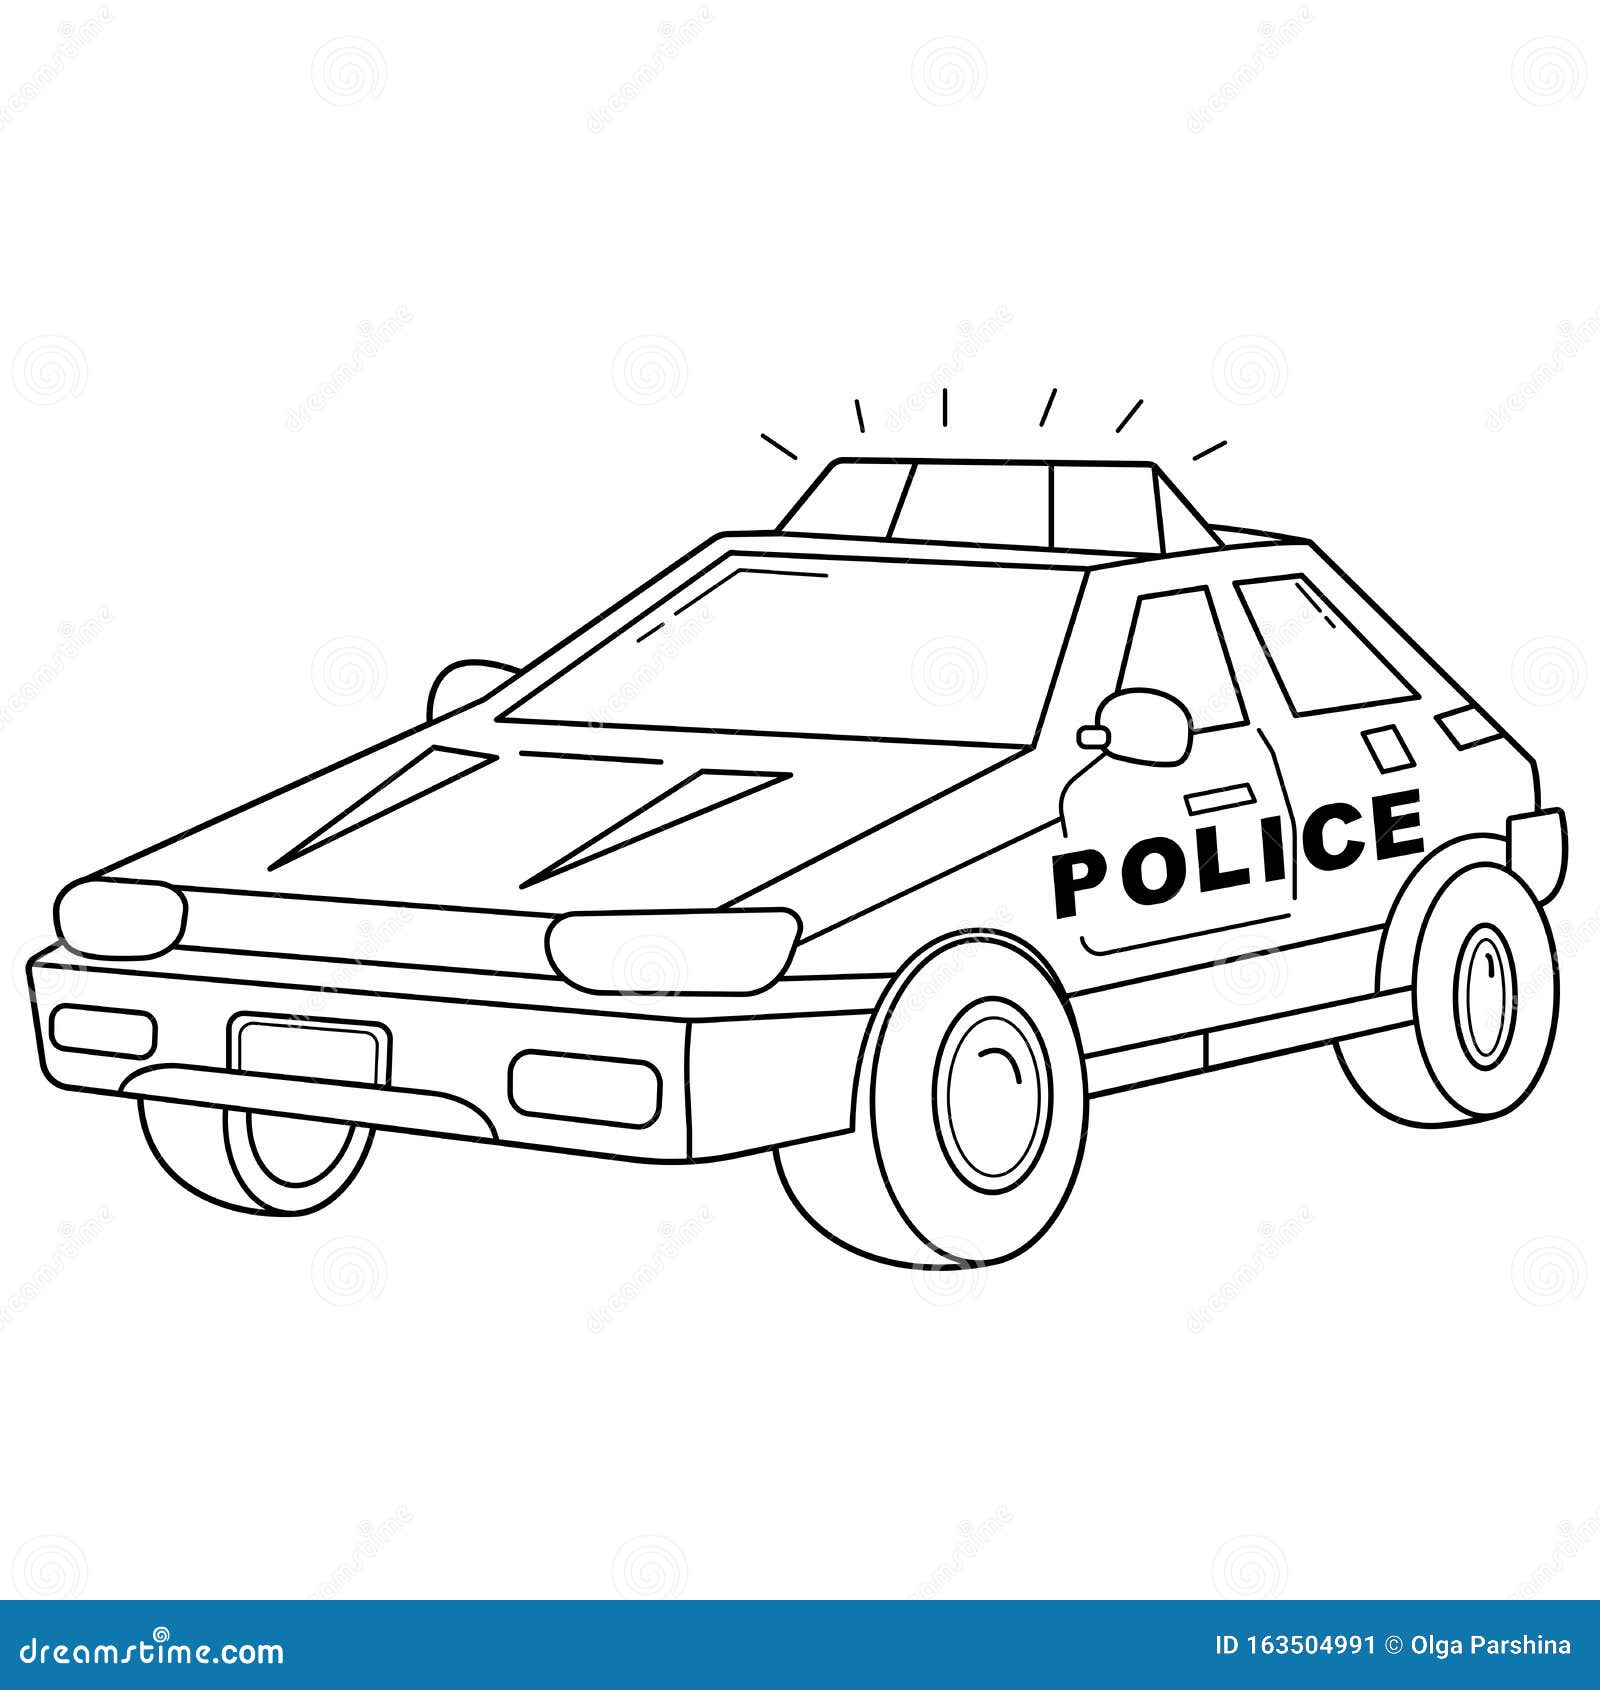 Download Coloring Page Outline Of Cartoon Police Car. Police ...